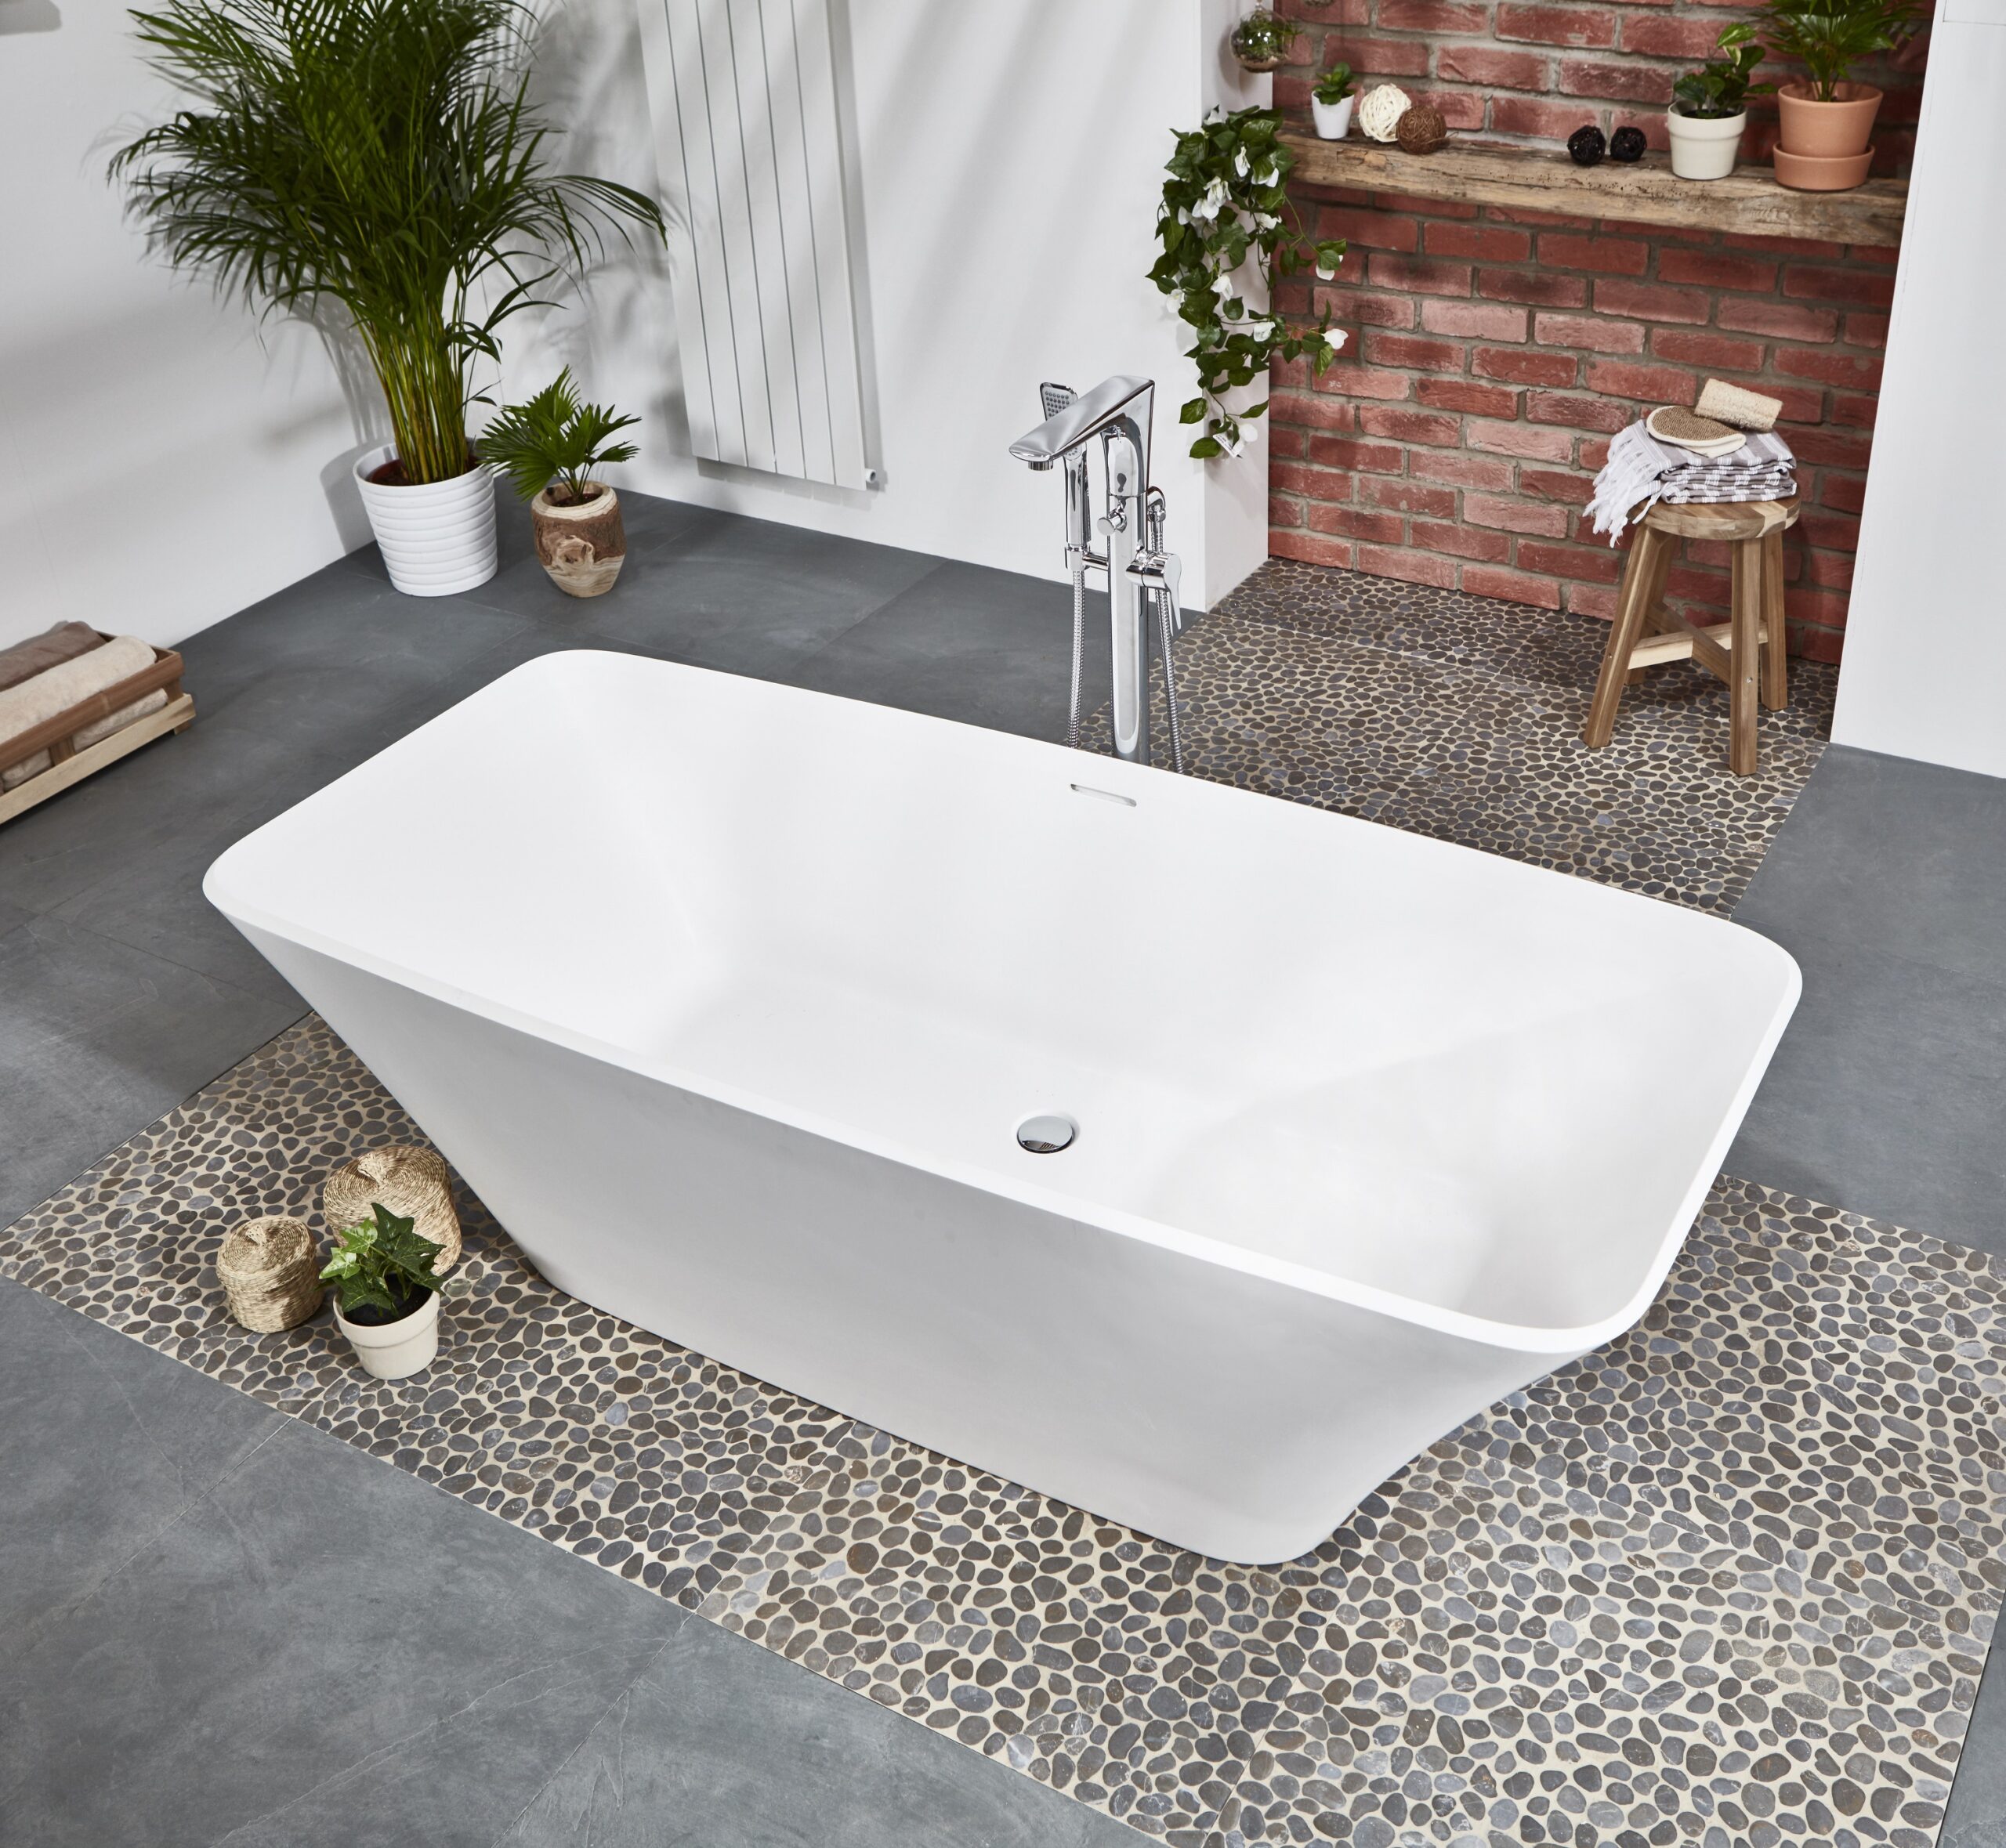 Stone-resin-scaled A Comparison of Different Bath Materials: Which is Best?